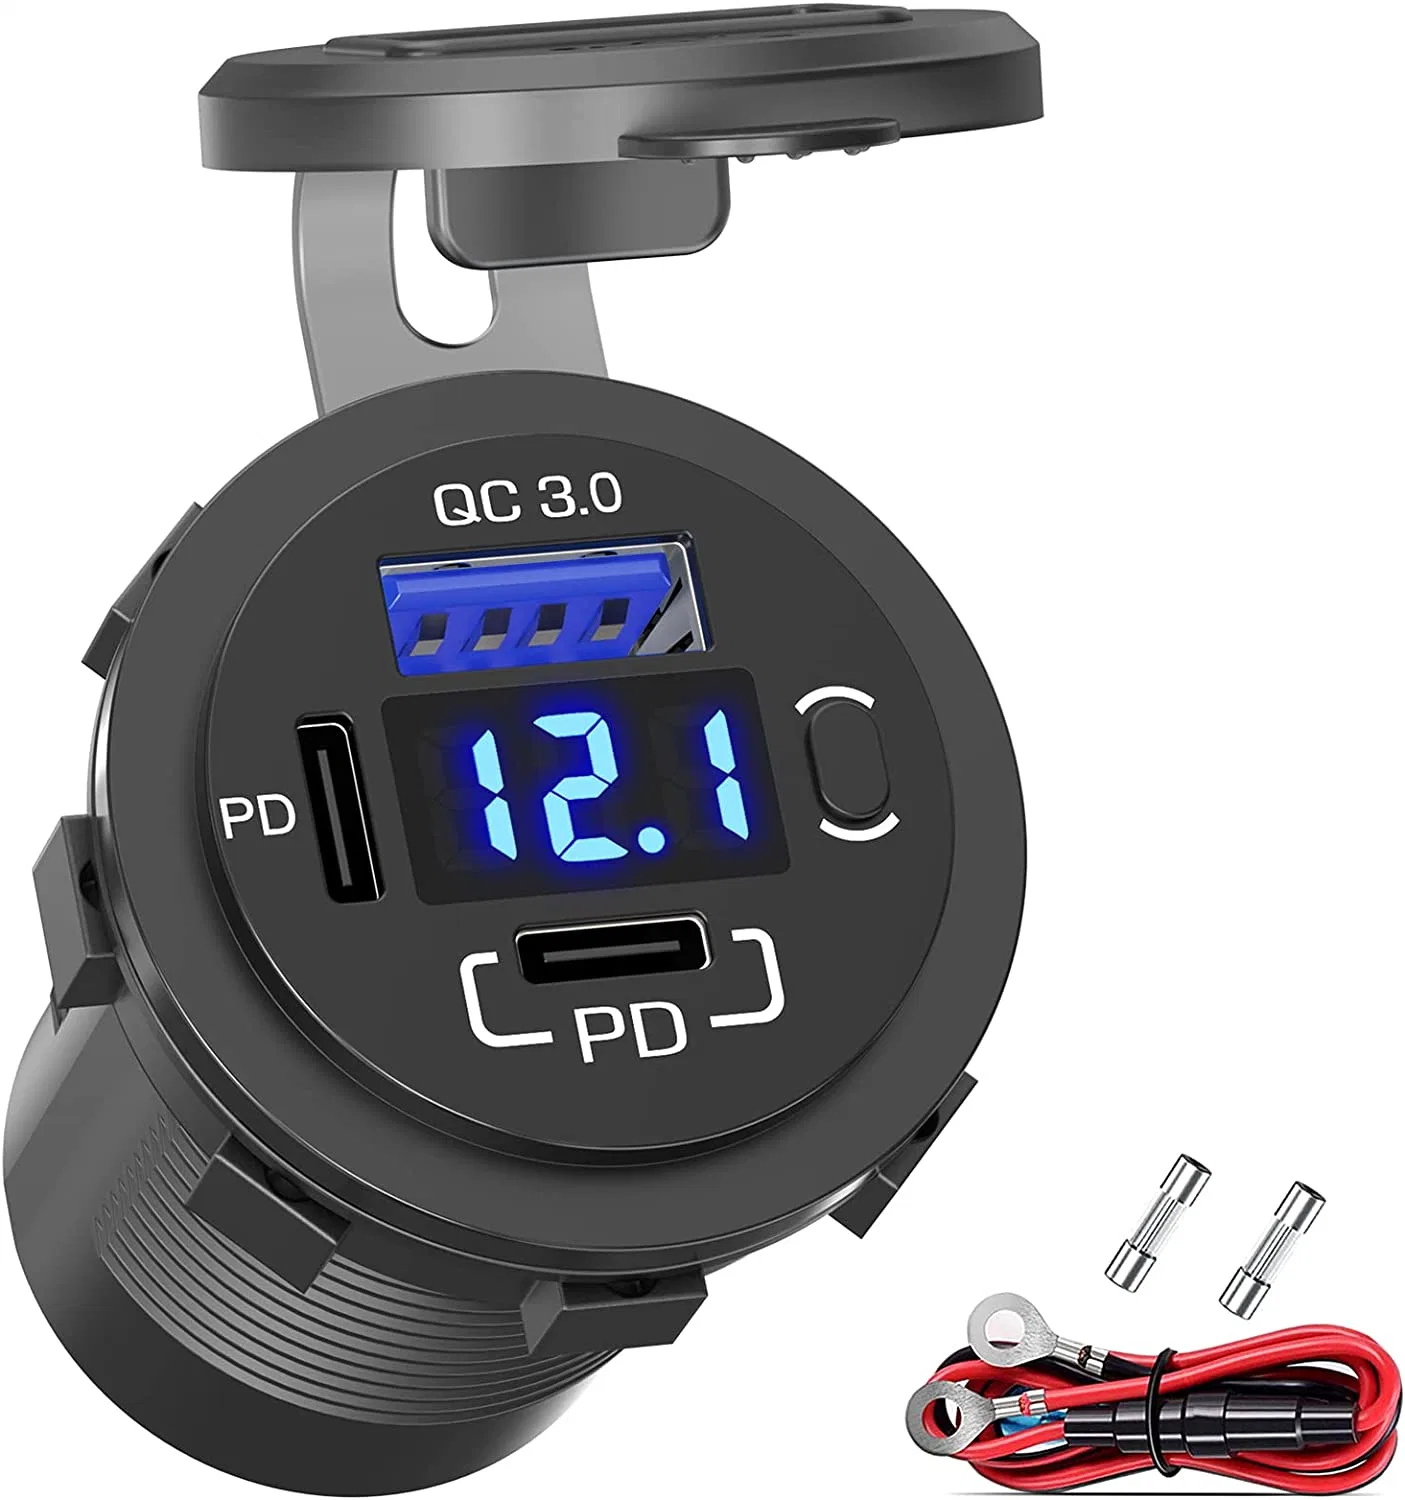 2V USB Outlet Qidoe USB C Car Charger Socket Dual 12V USB-C Pd 20W & 18W QC3.0 USB Car Port with Voltmeter Button Switch Lengthened Waterproof USB Outlet for Ca